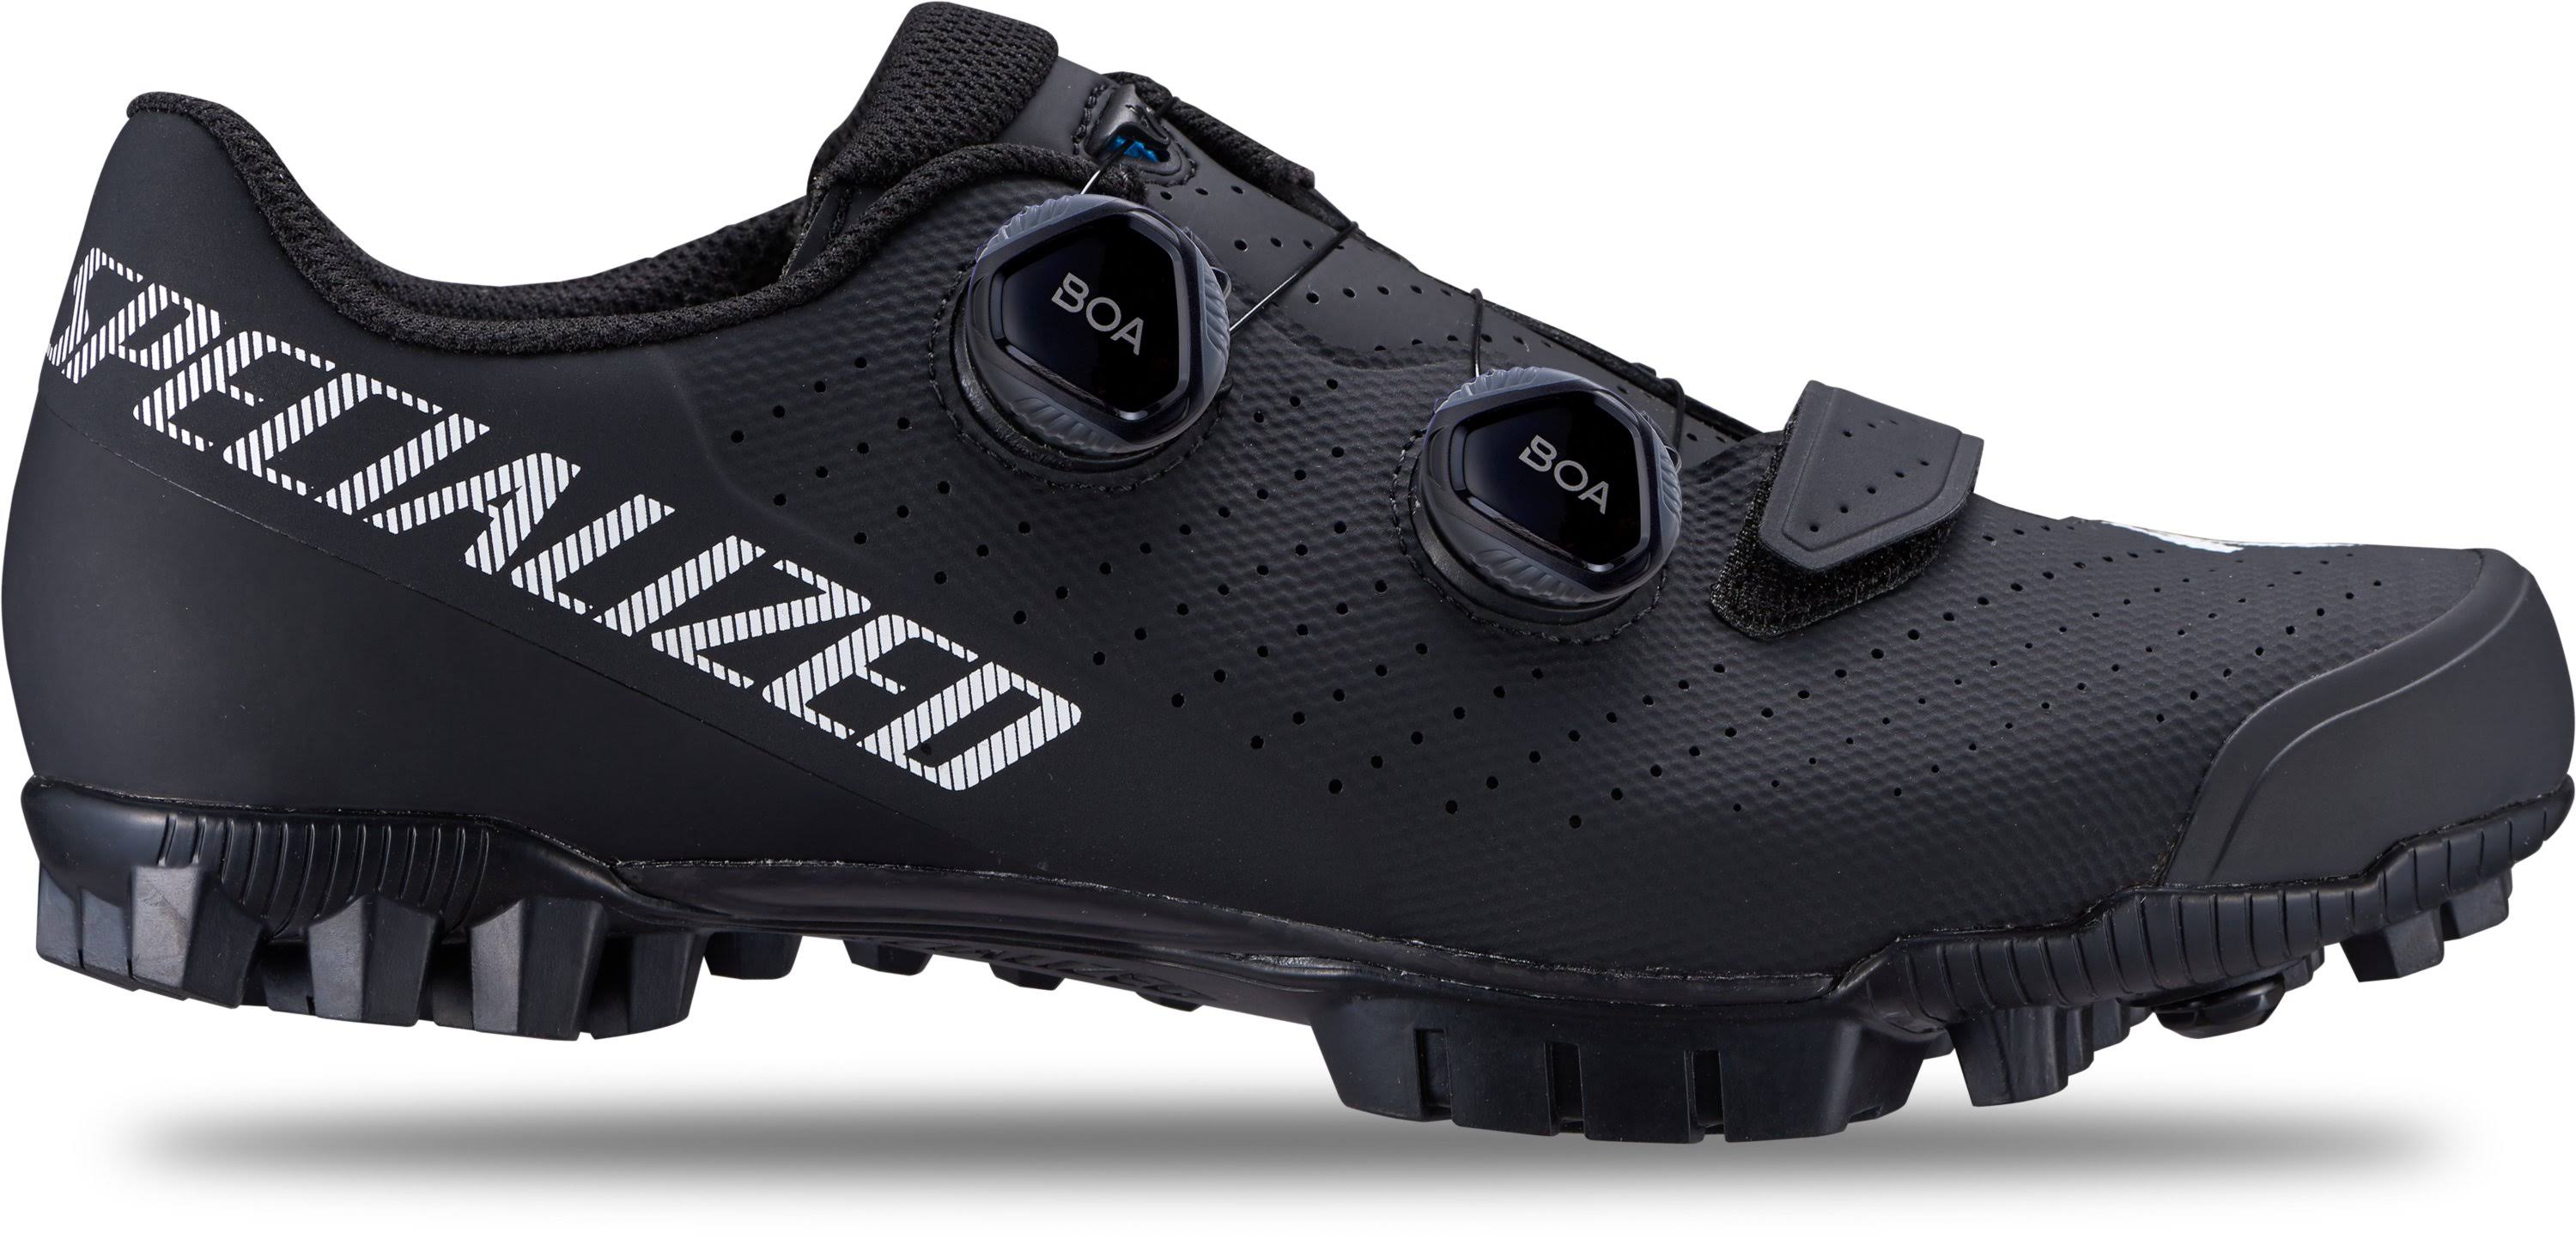 Specialized Recon 3.0 MTB Shoes | Black